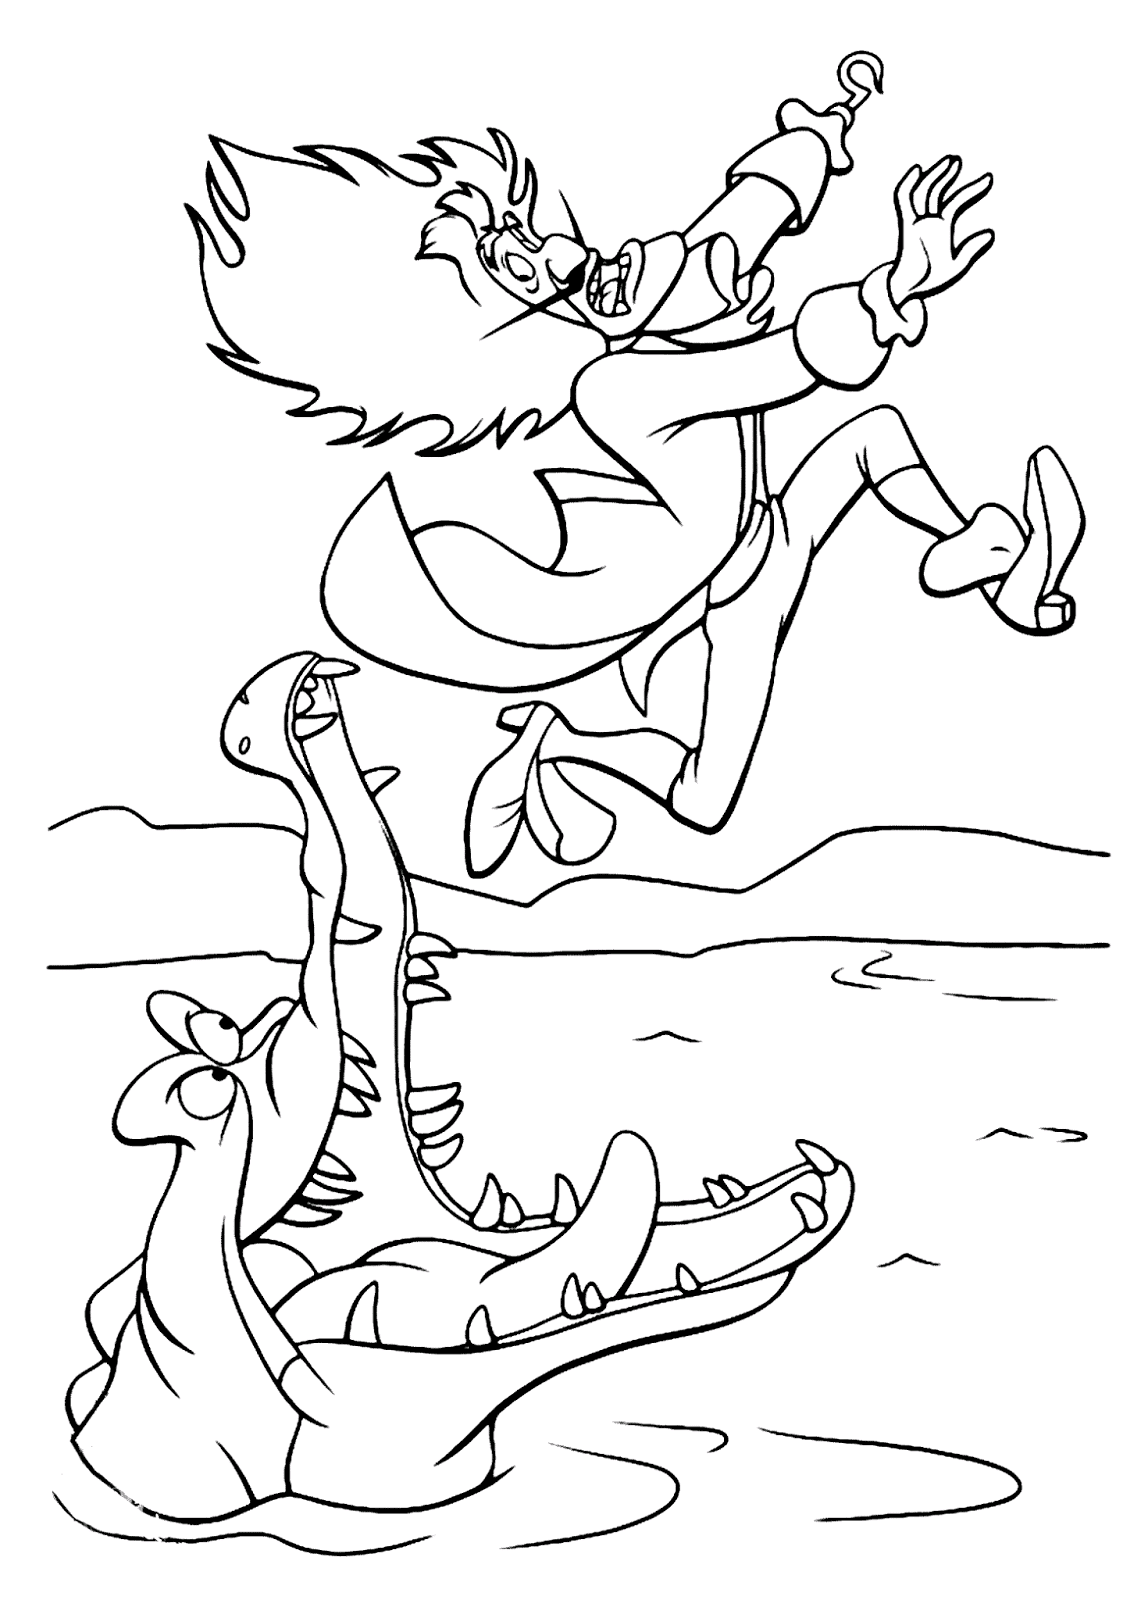 Funny Alligator And Captain Hook Coloring Pages